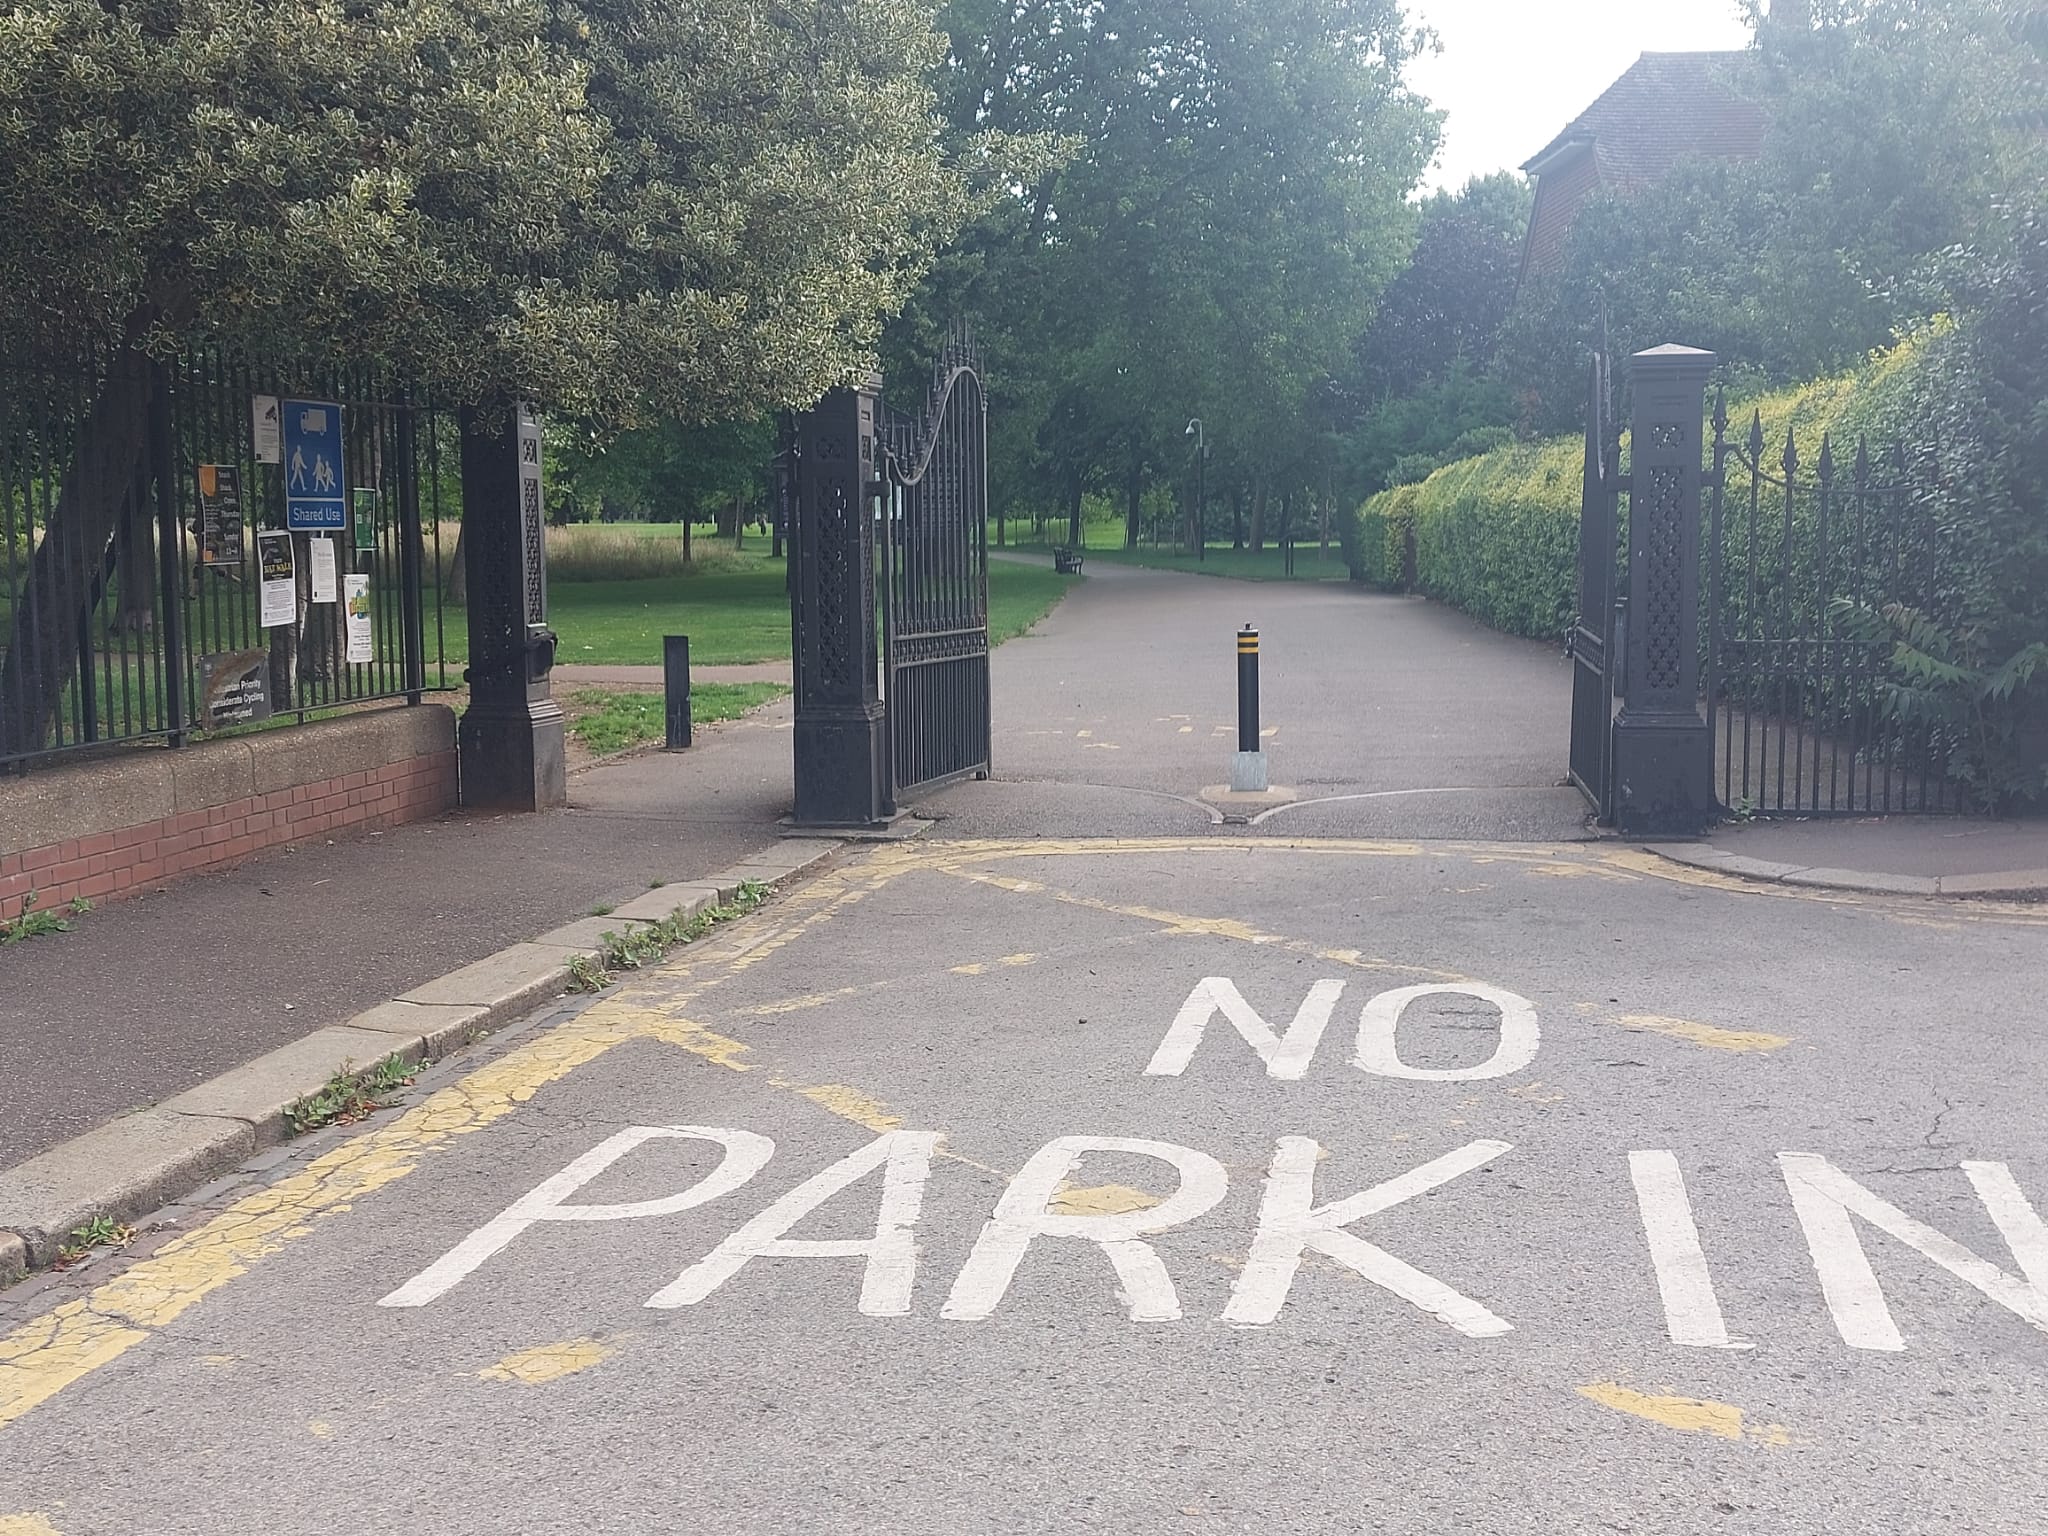 Entrance to West Ham Park Stratford | Personal Trainer Tips